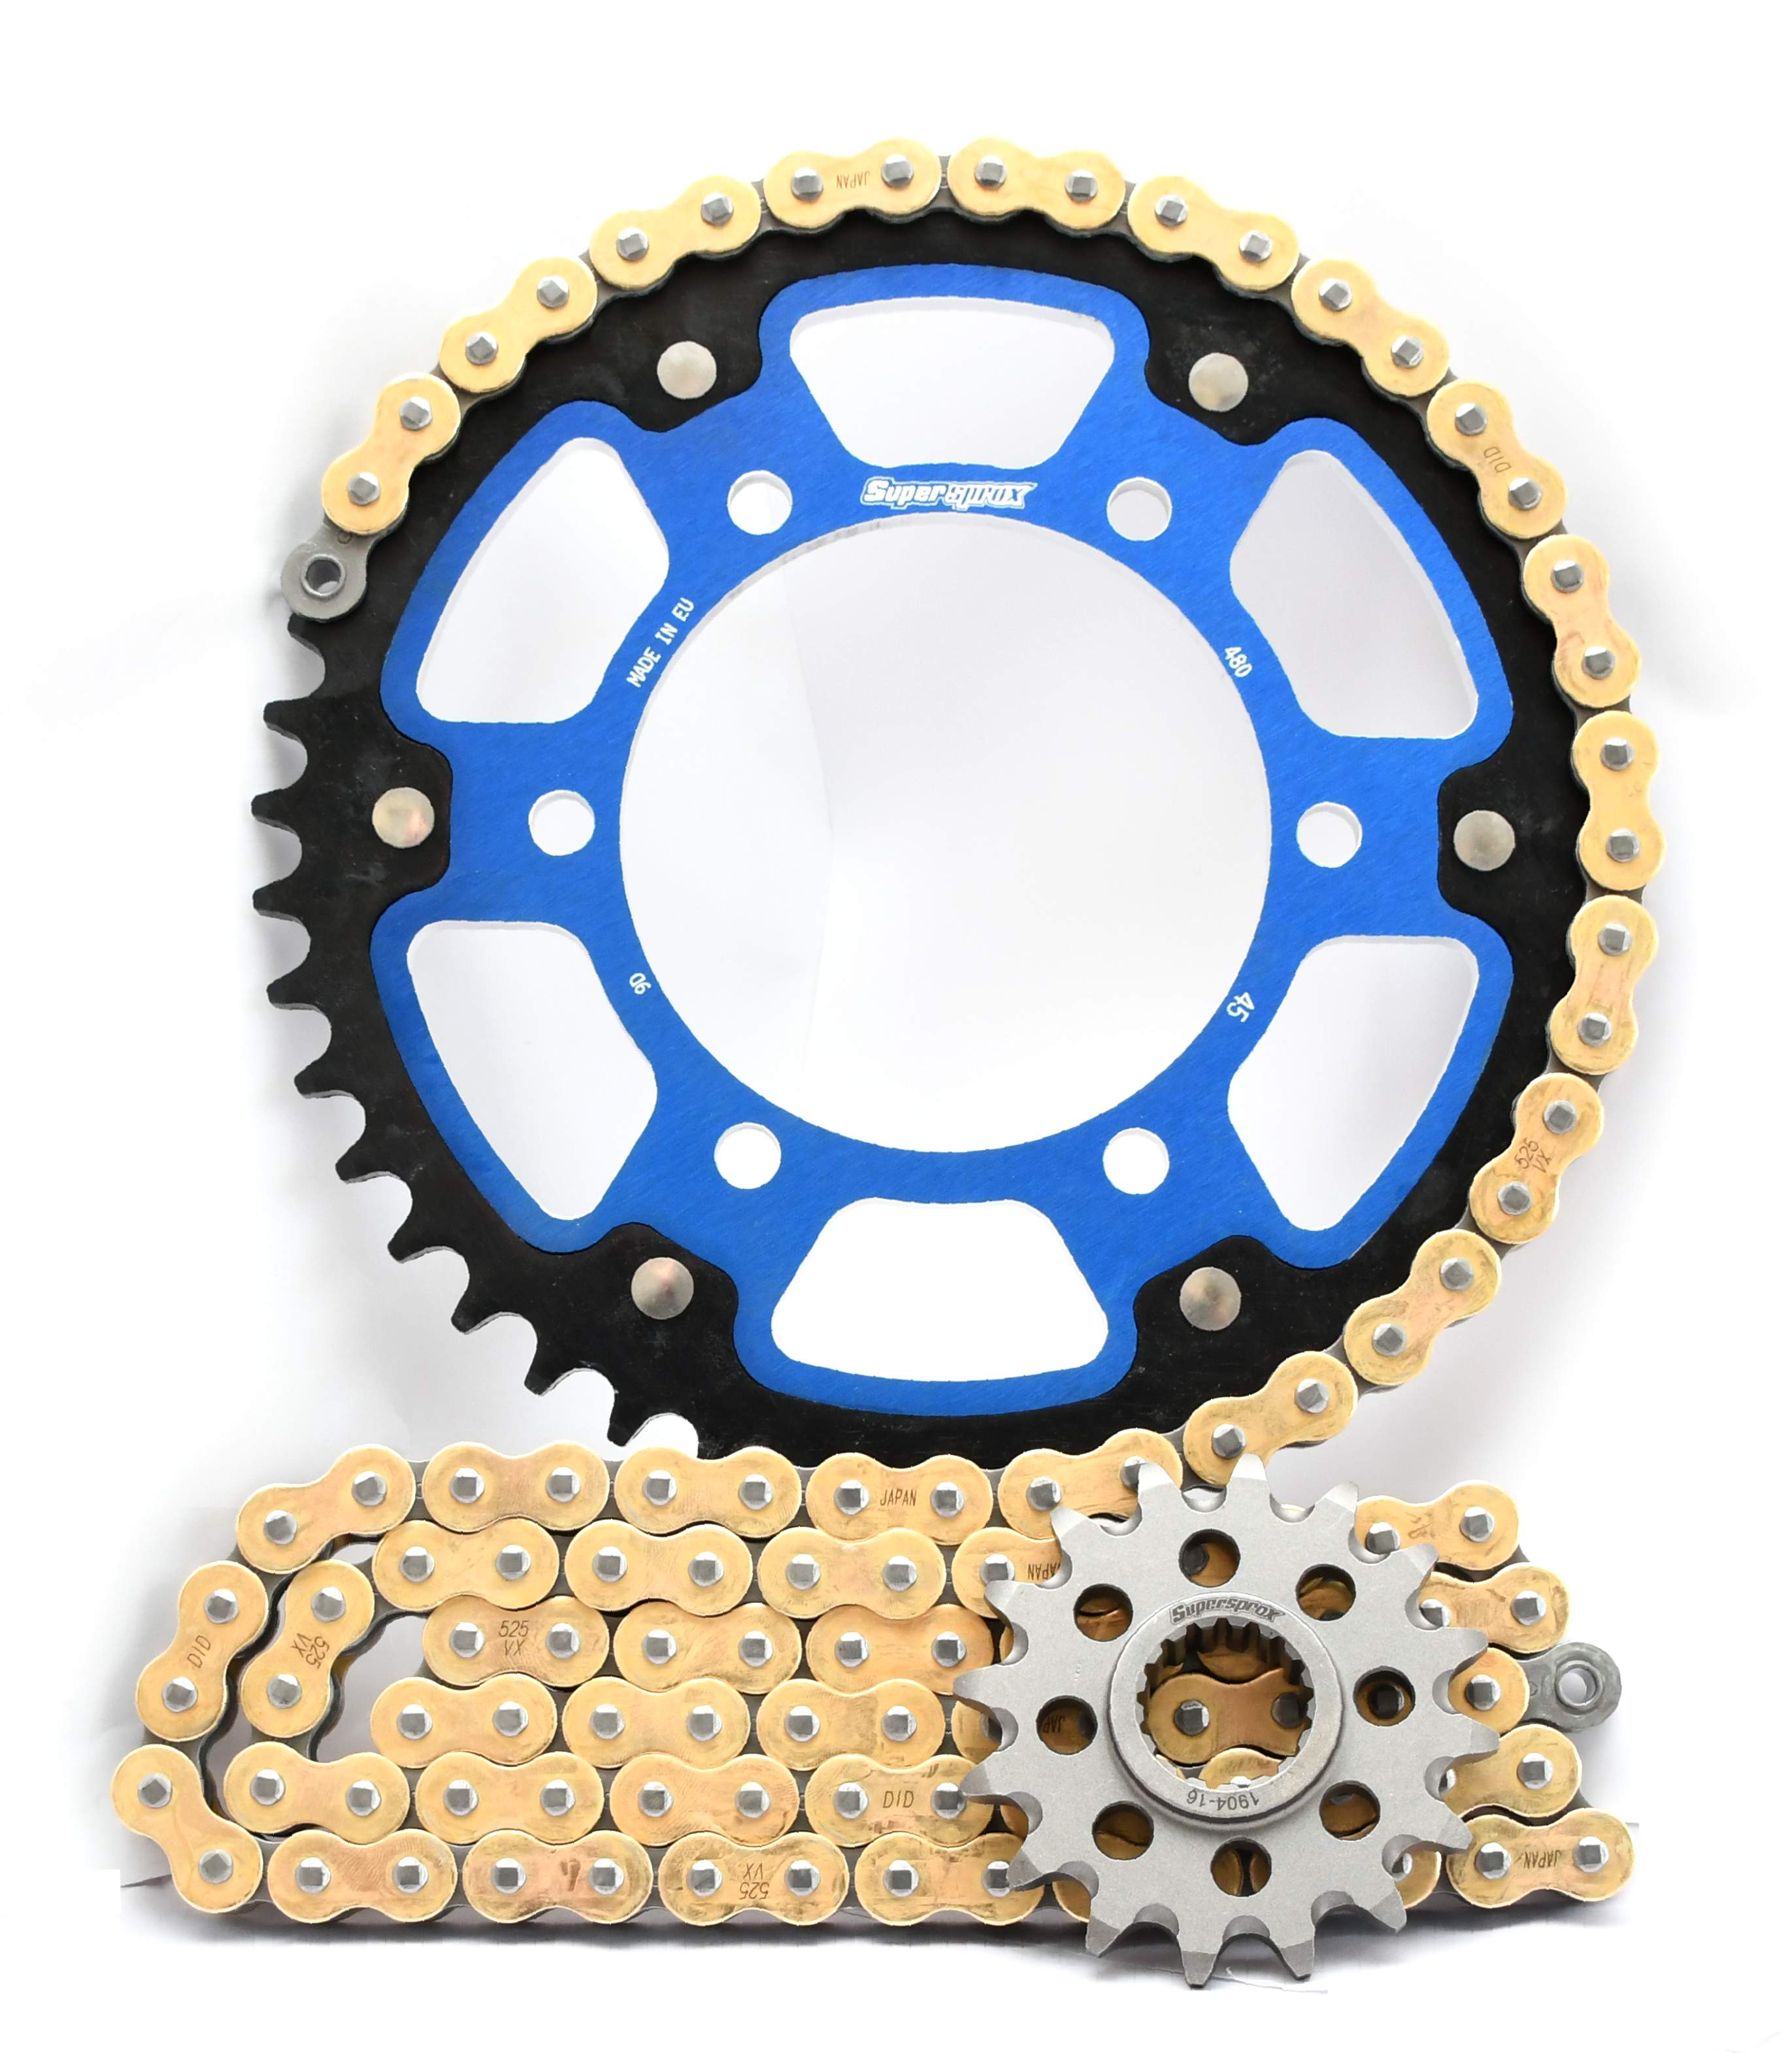 Supersprox Chain & Sprocket Kit for Yamaha YZF R1 2006-2008 - Standard Gearing - 0